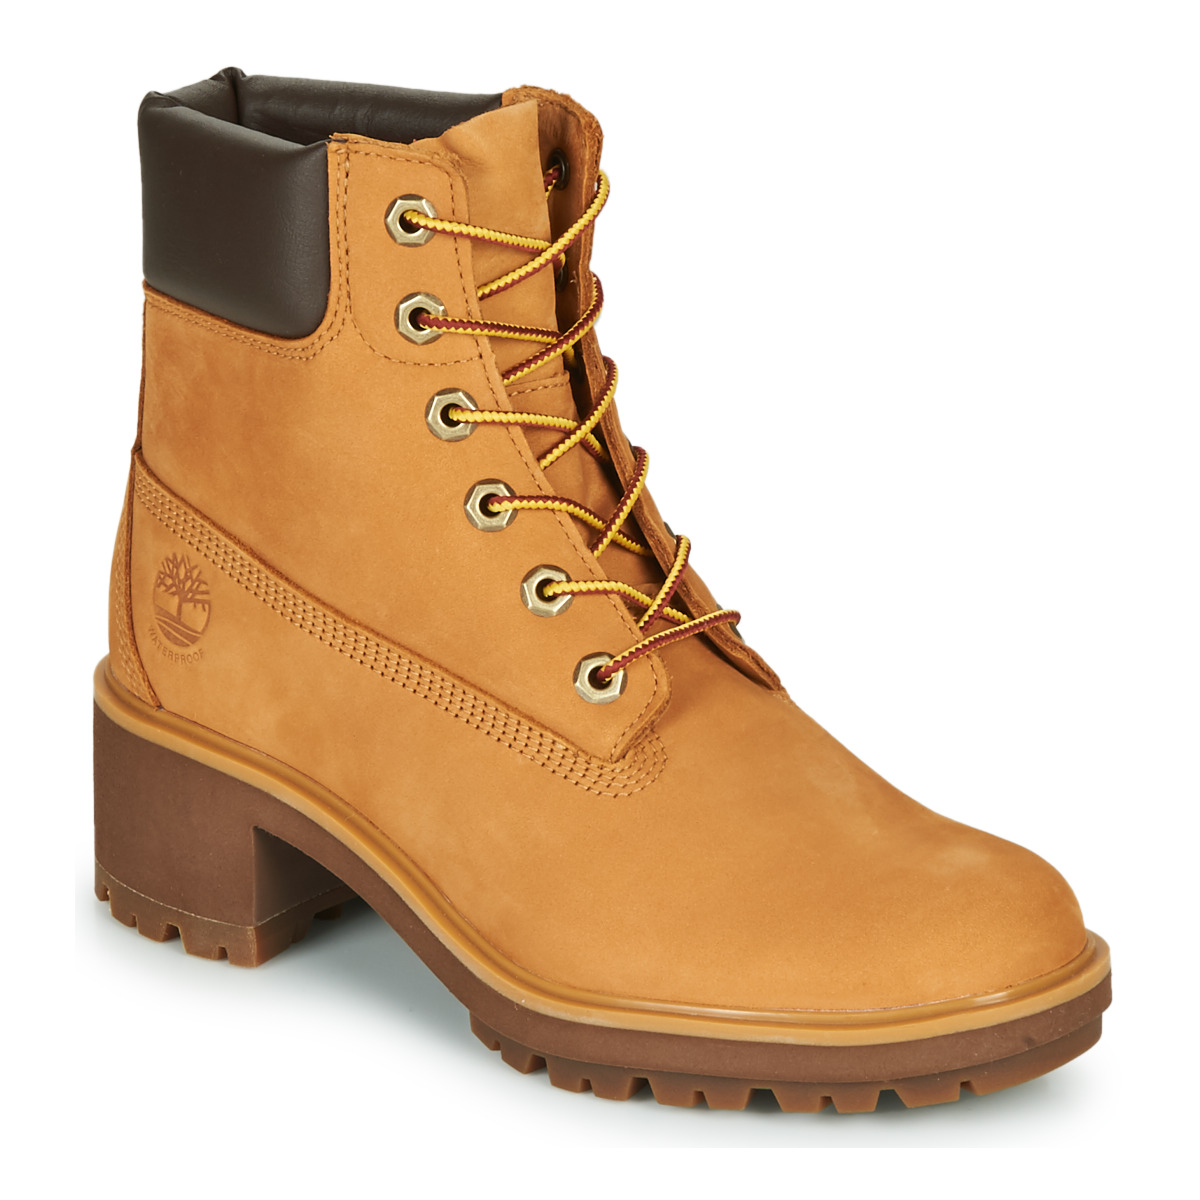 Kengät Timberland KINSLEY 6 IN WP BOOT 40